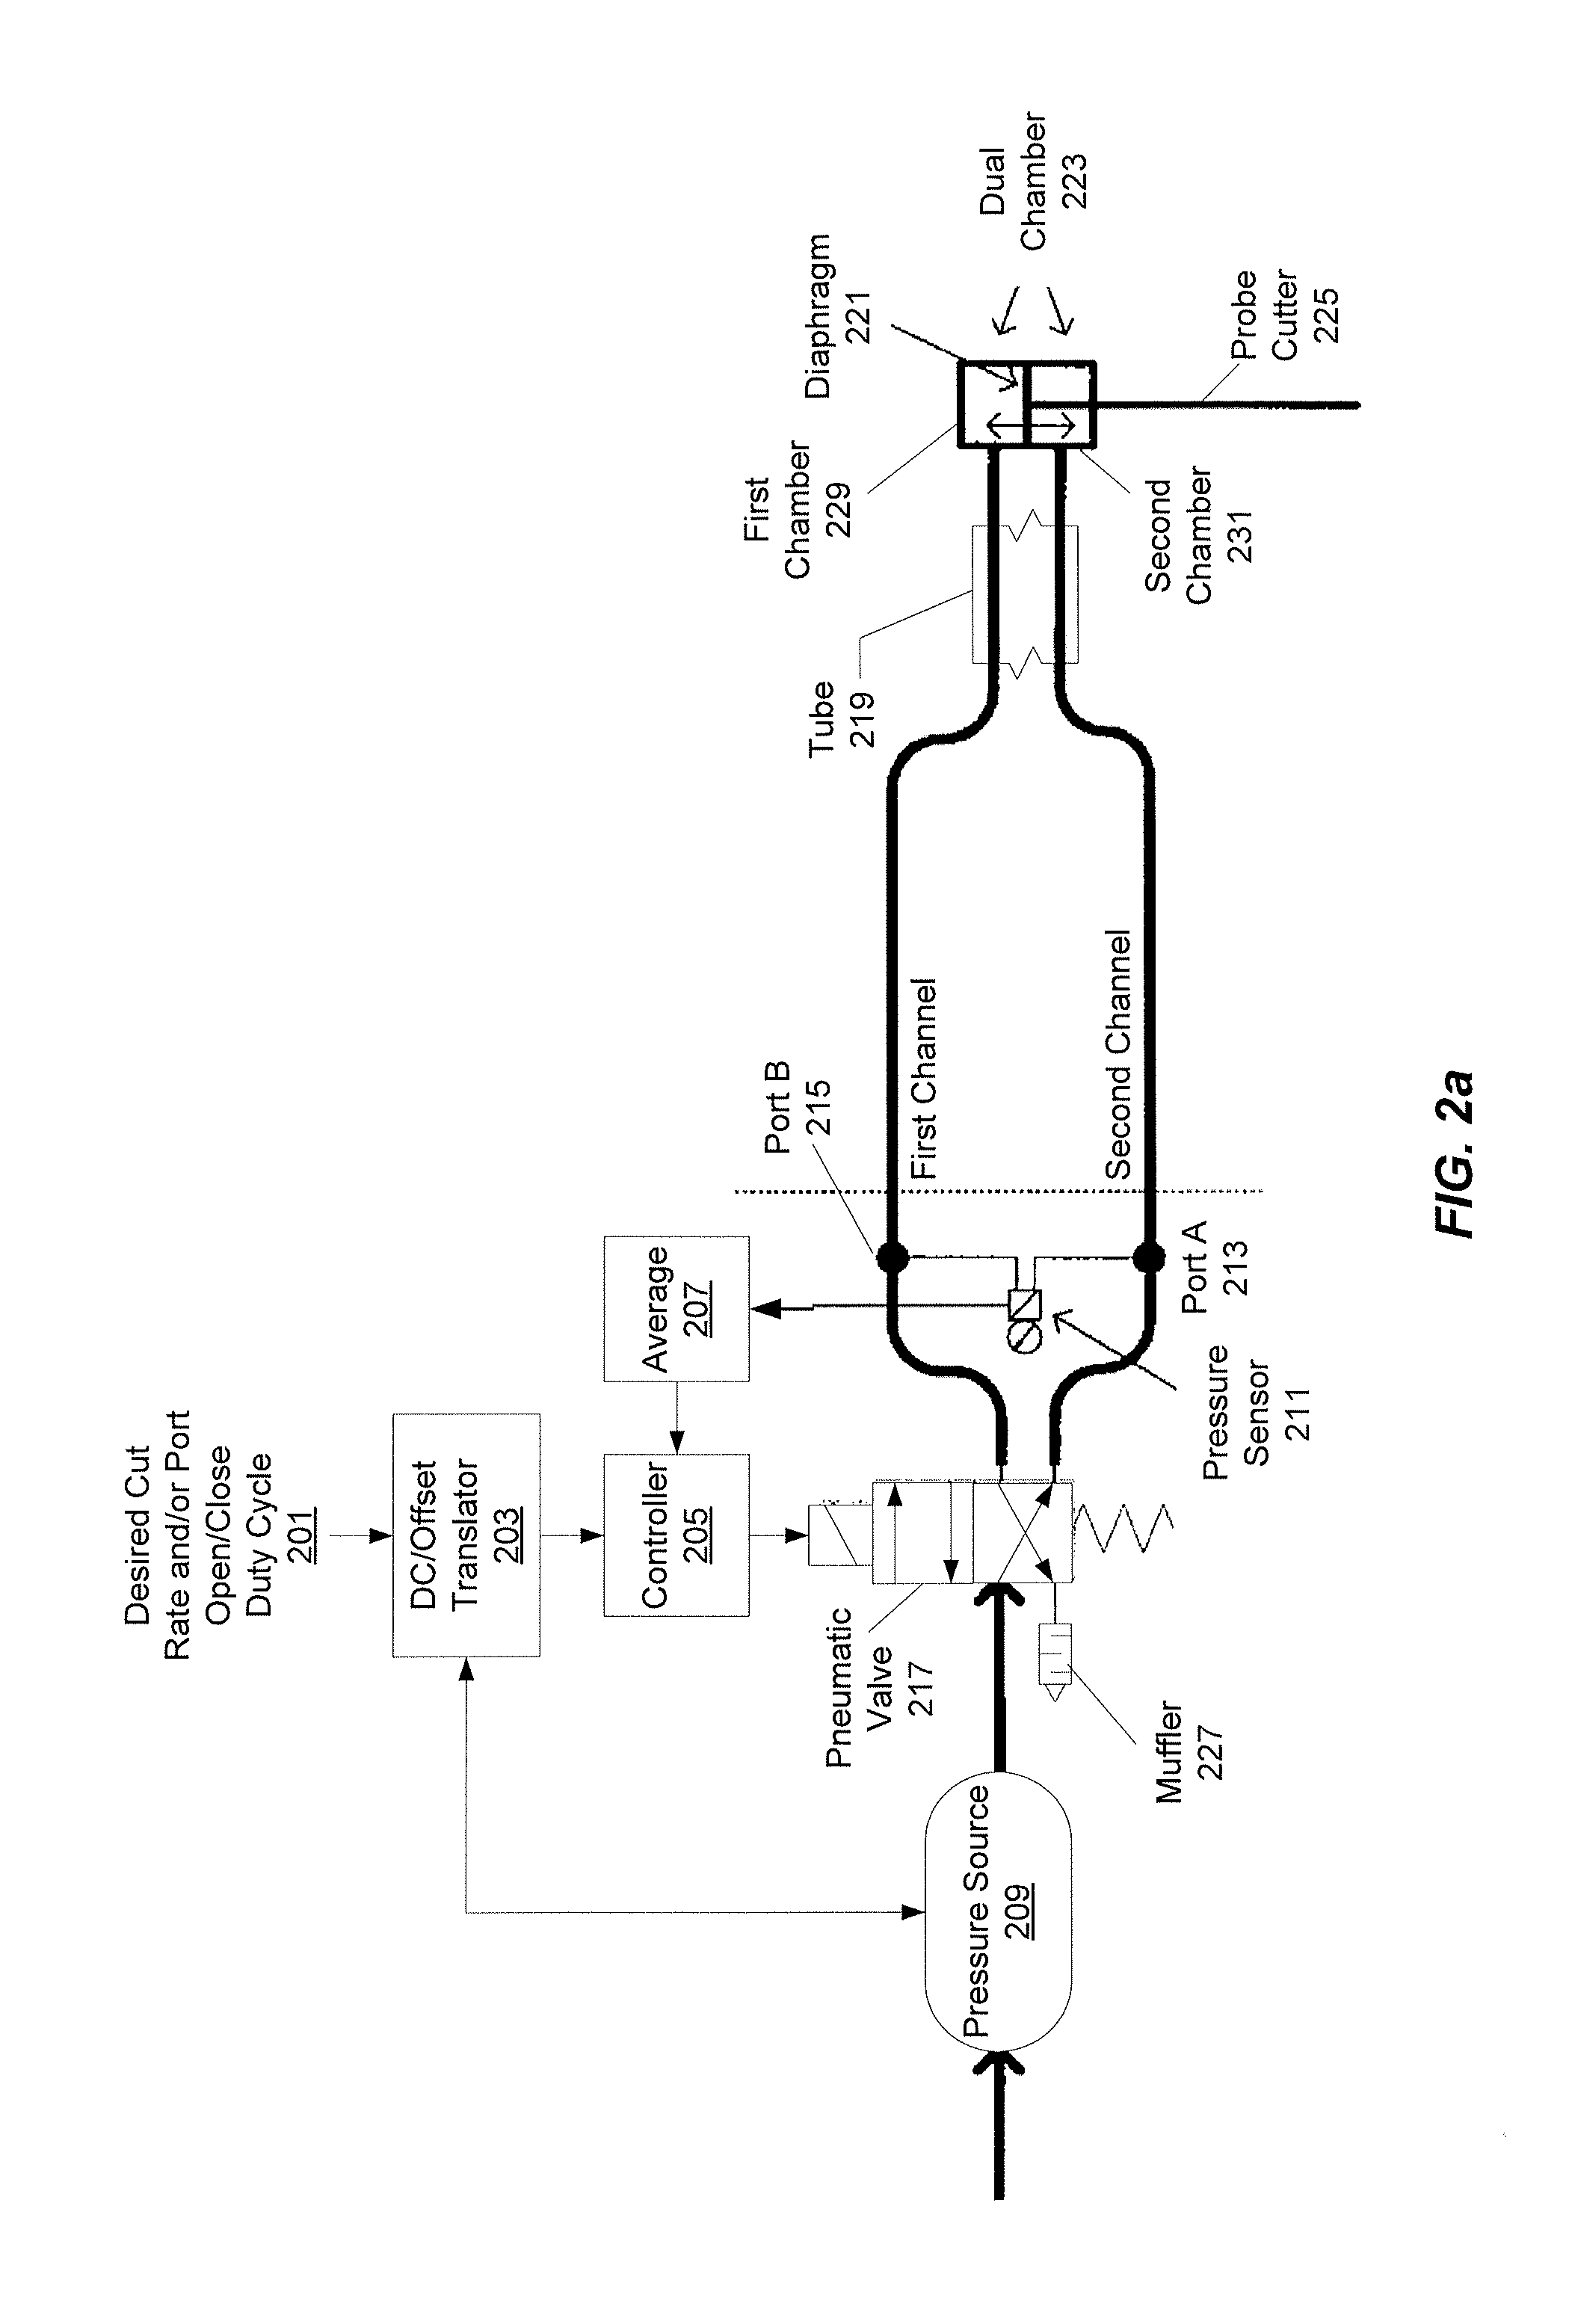 Systems and Methods for Dynamic Pneumatic Valve Driver